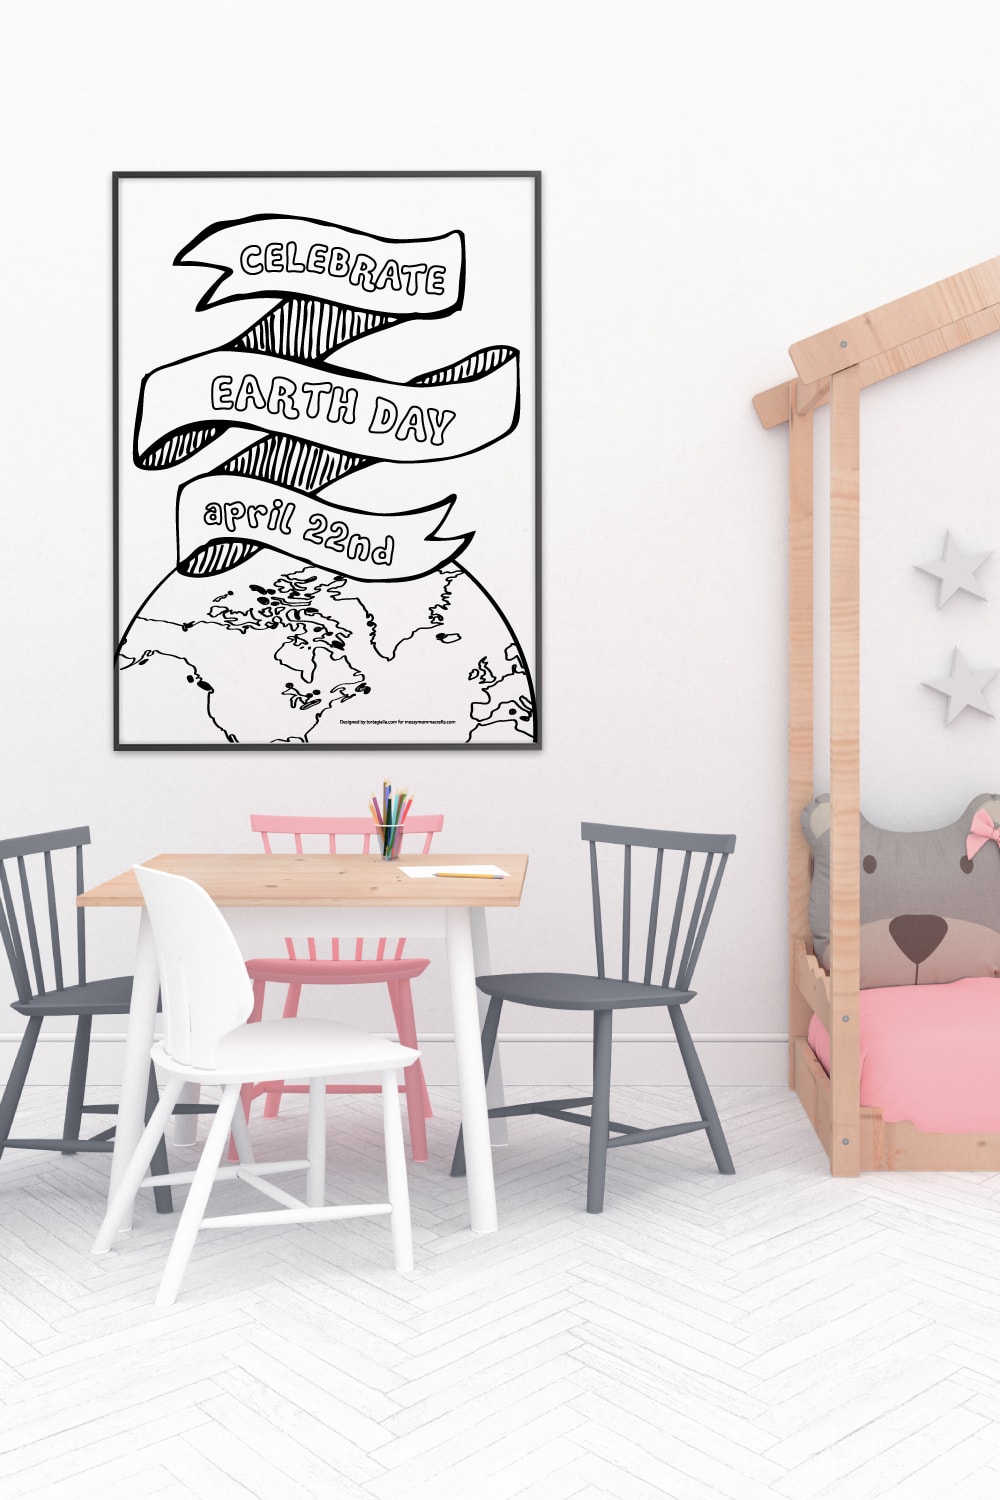 Preview of celebrate earth day illustration in a poster frame on white wall in kids room with desk and chairs under and view of bed with bear cushion on the right side. 